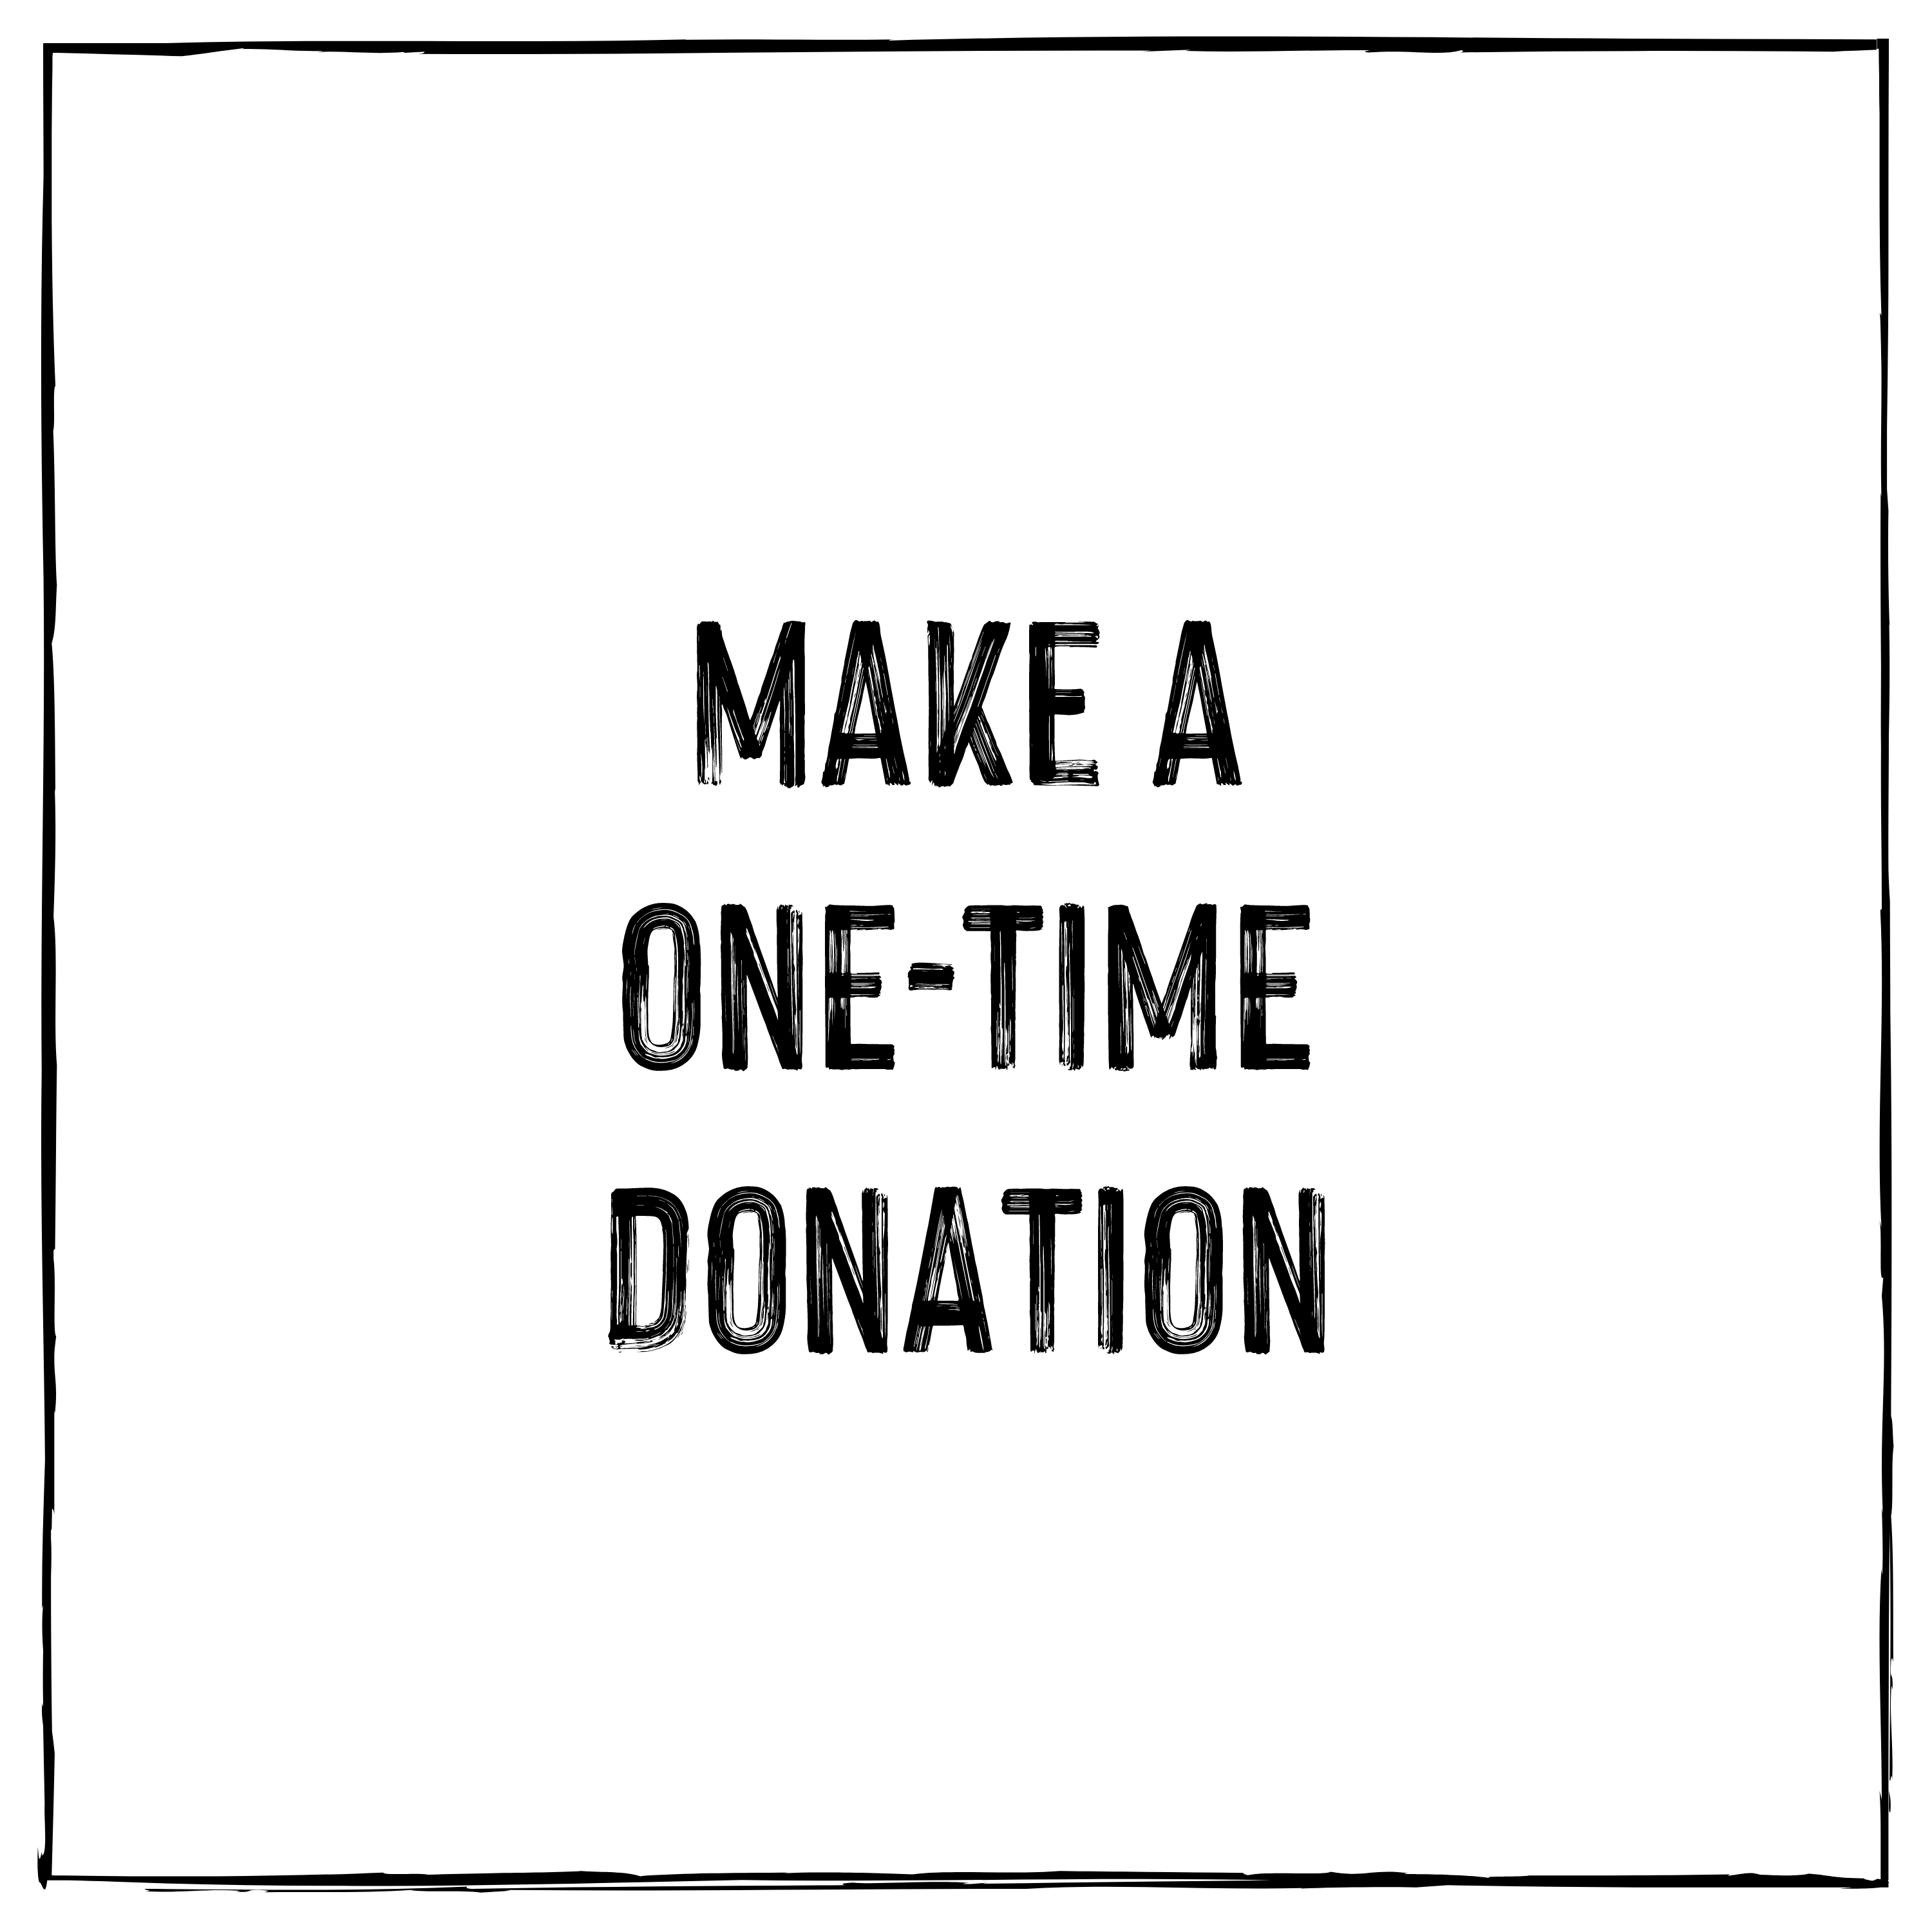 One-time Donation